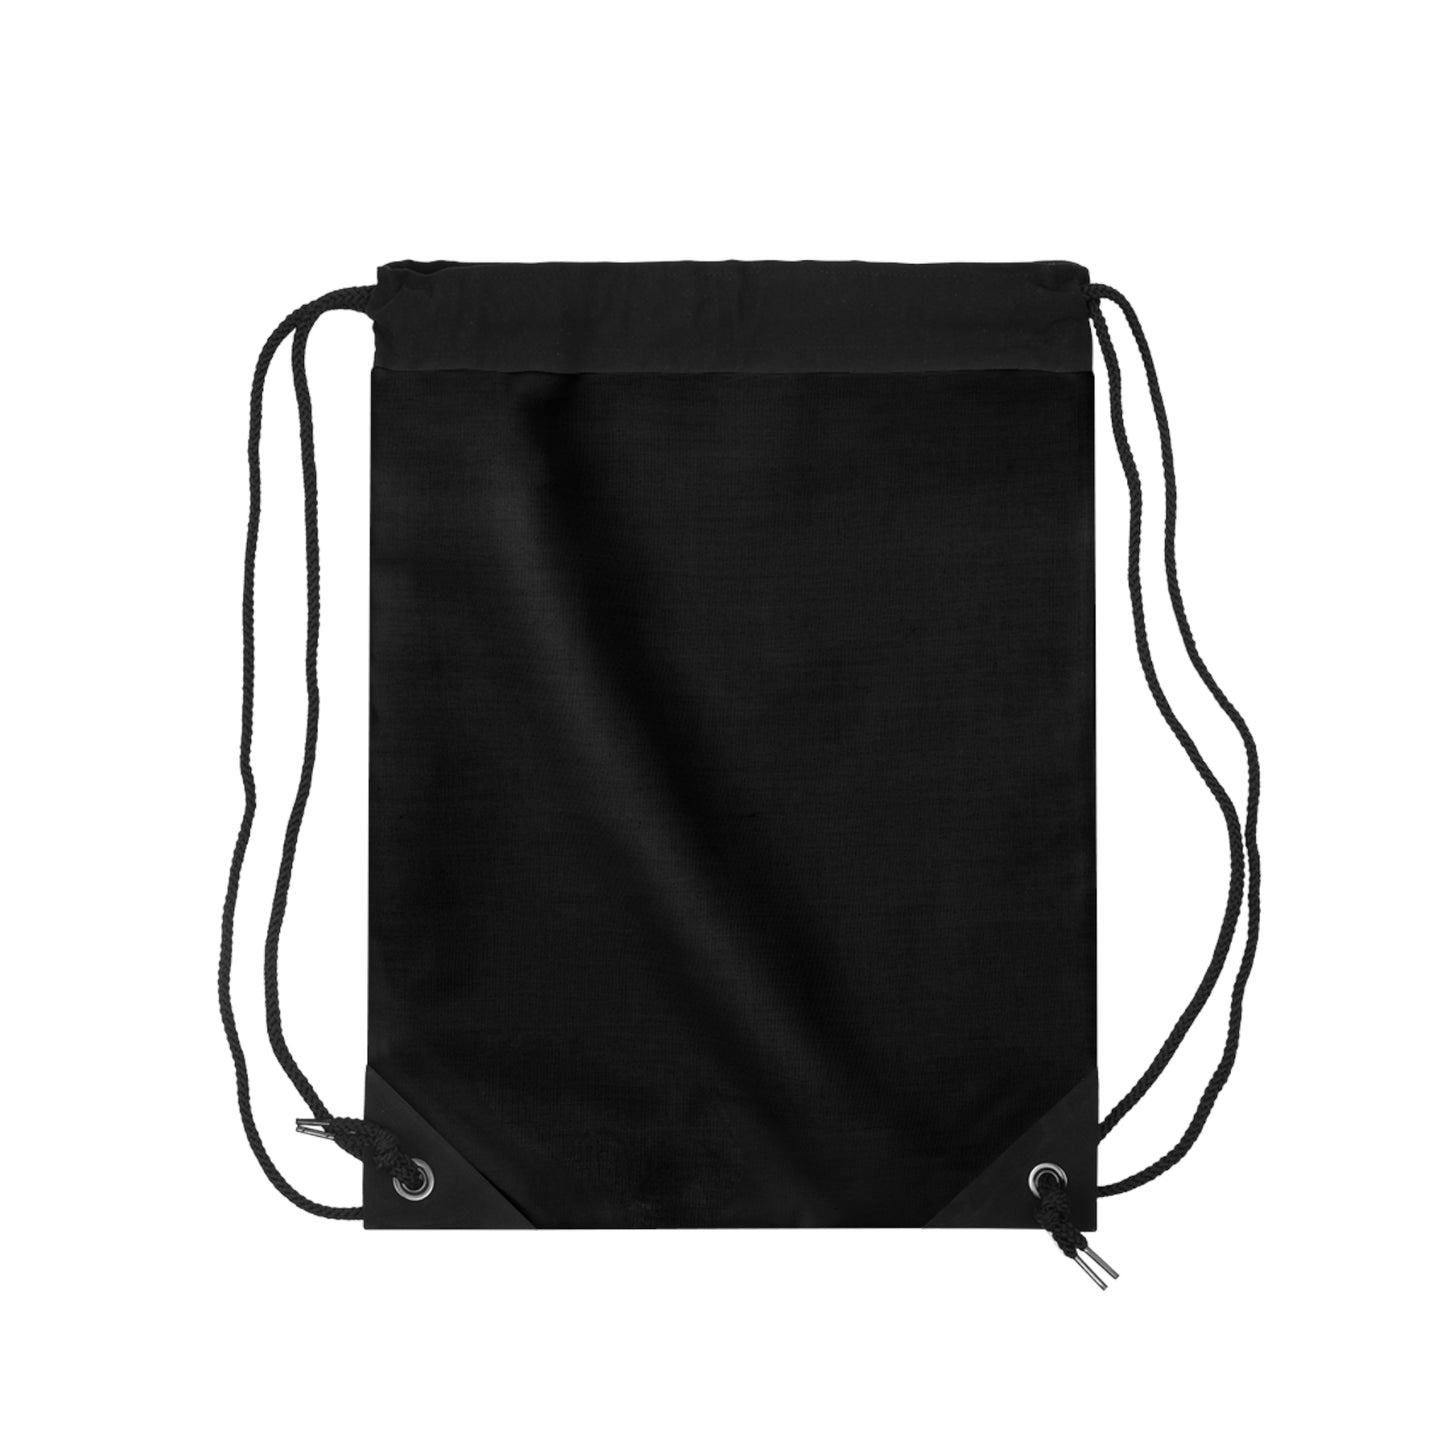 Overcomer, God's Strength Is Made Perfect In My Weakness Drawstring Bag